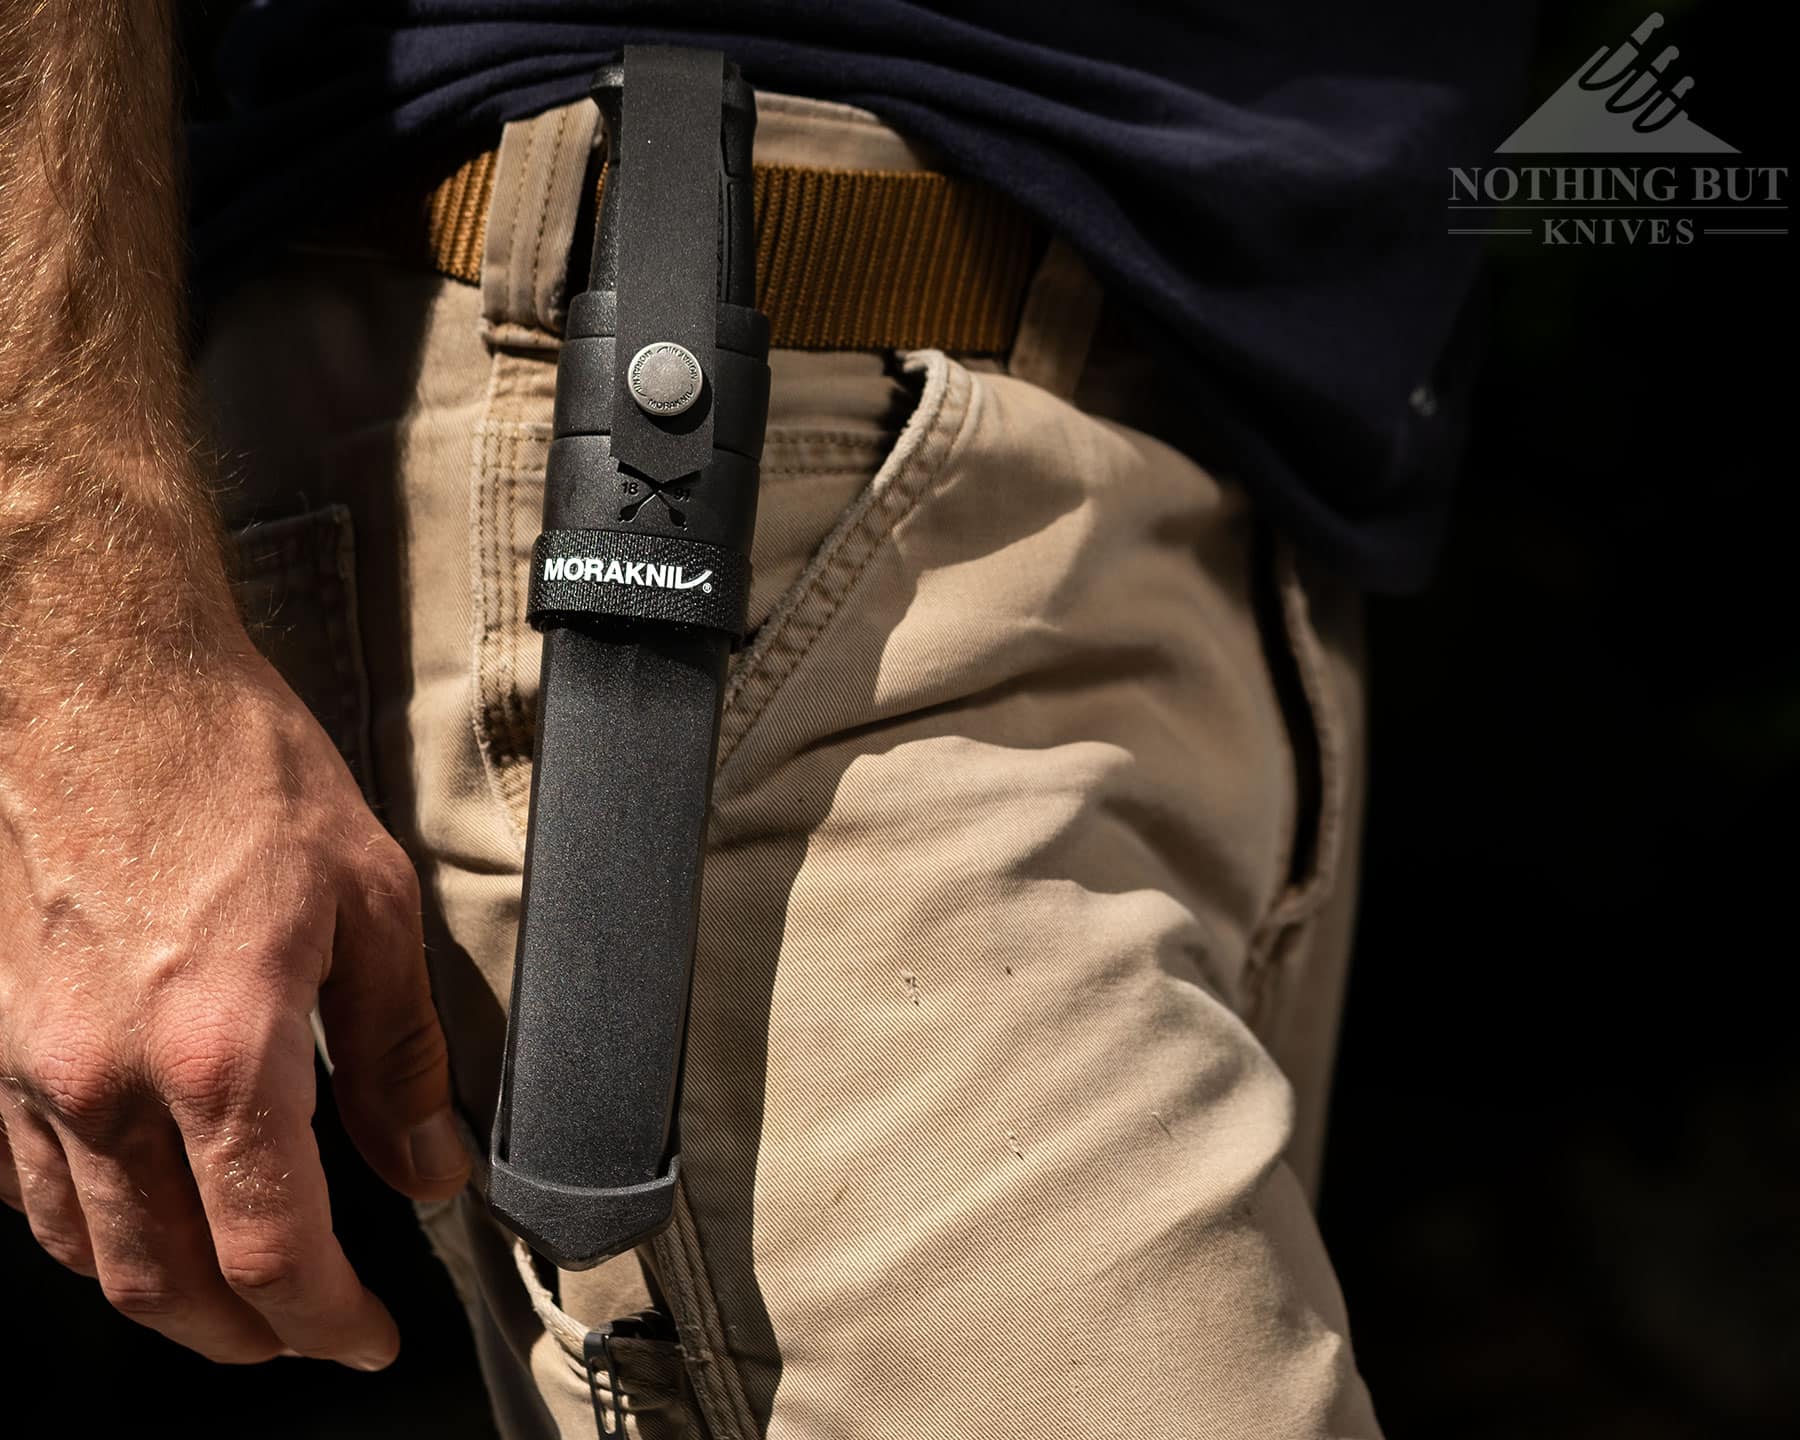 The sheath that ships with the Garberg is more practical than most other Mora sheaths. 